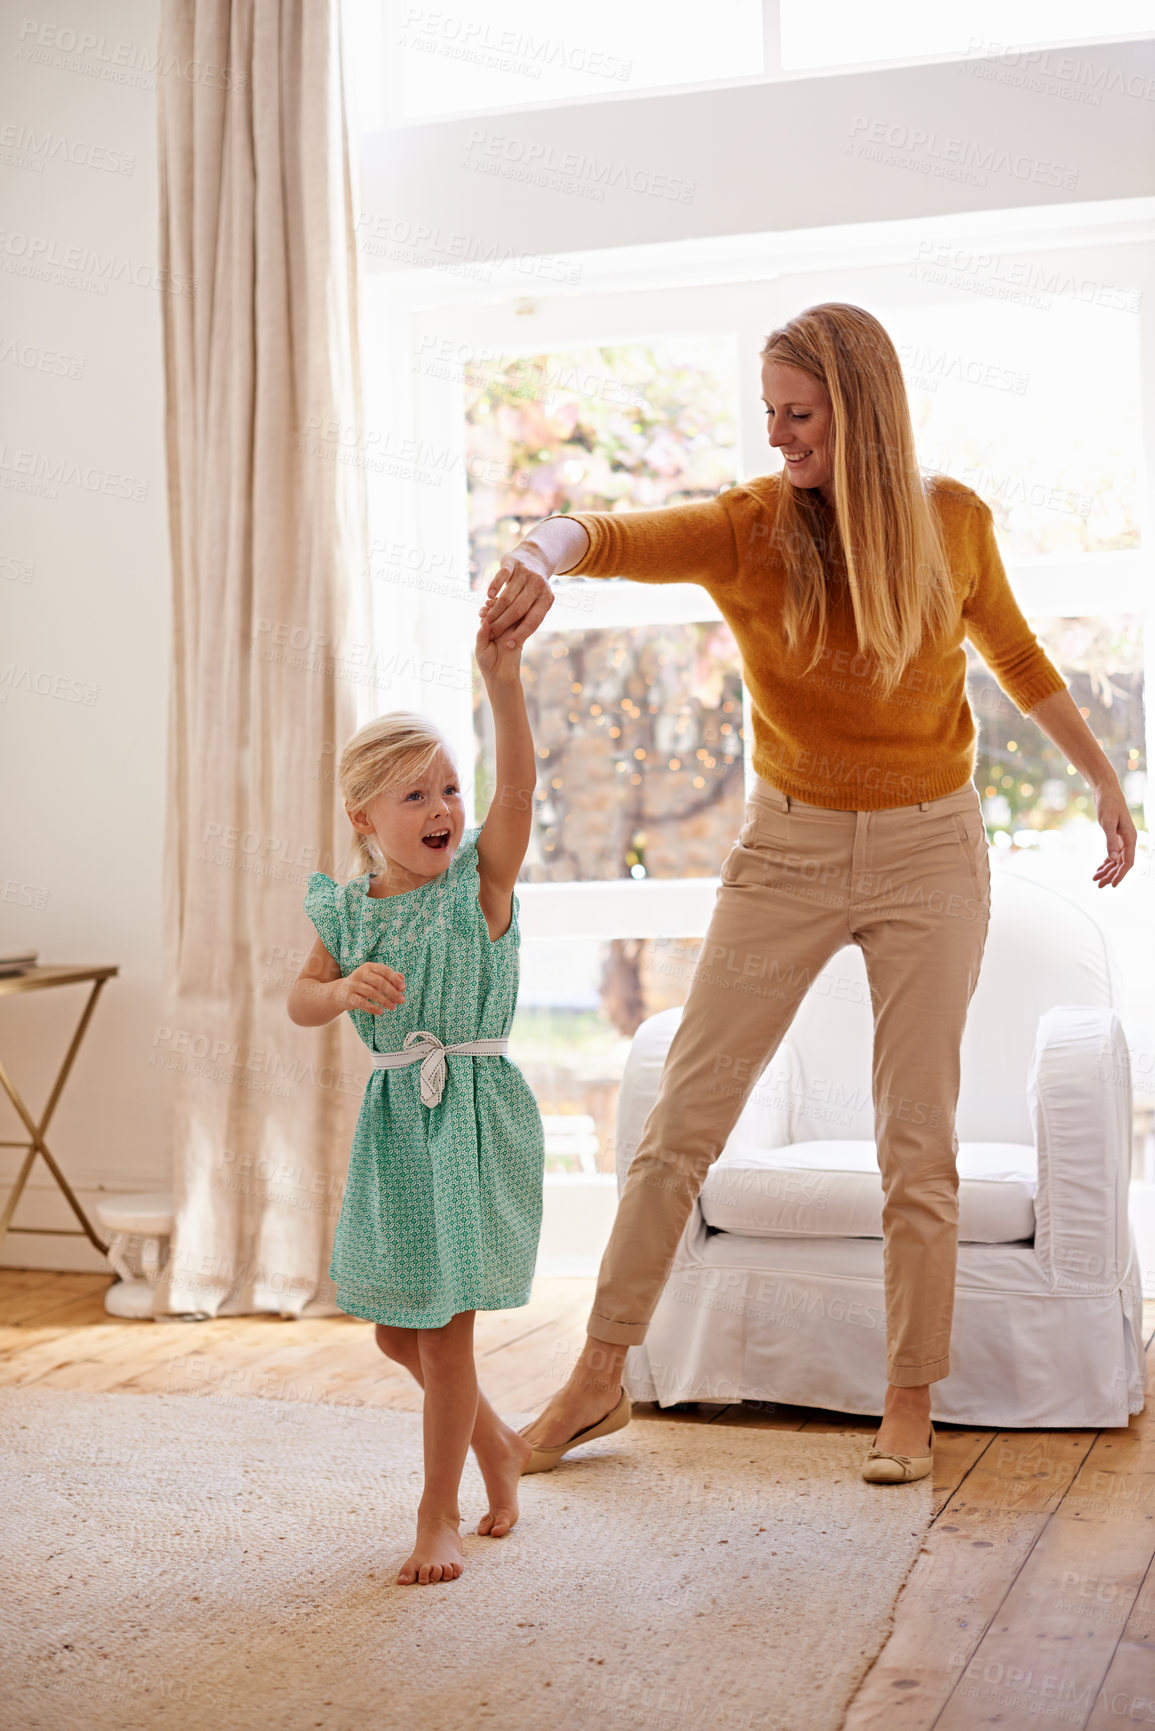 Buy stock photo Full-length shot of a young woman playfully dancing with her little girl